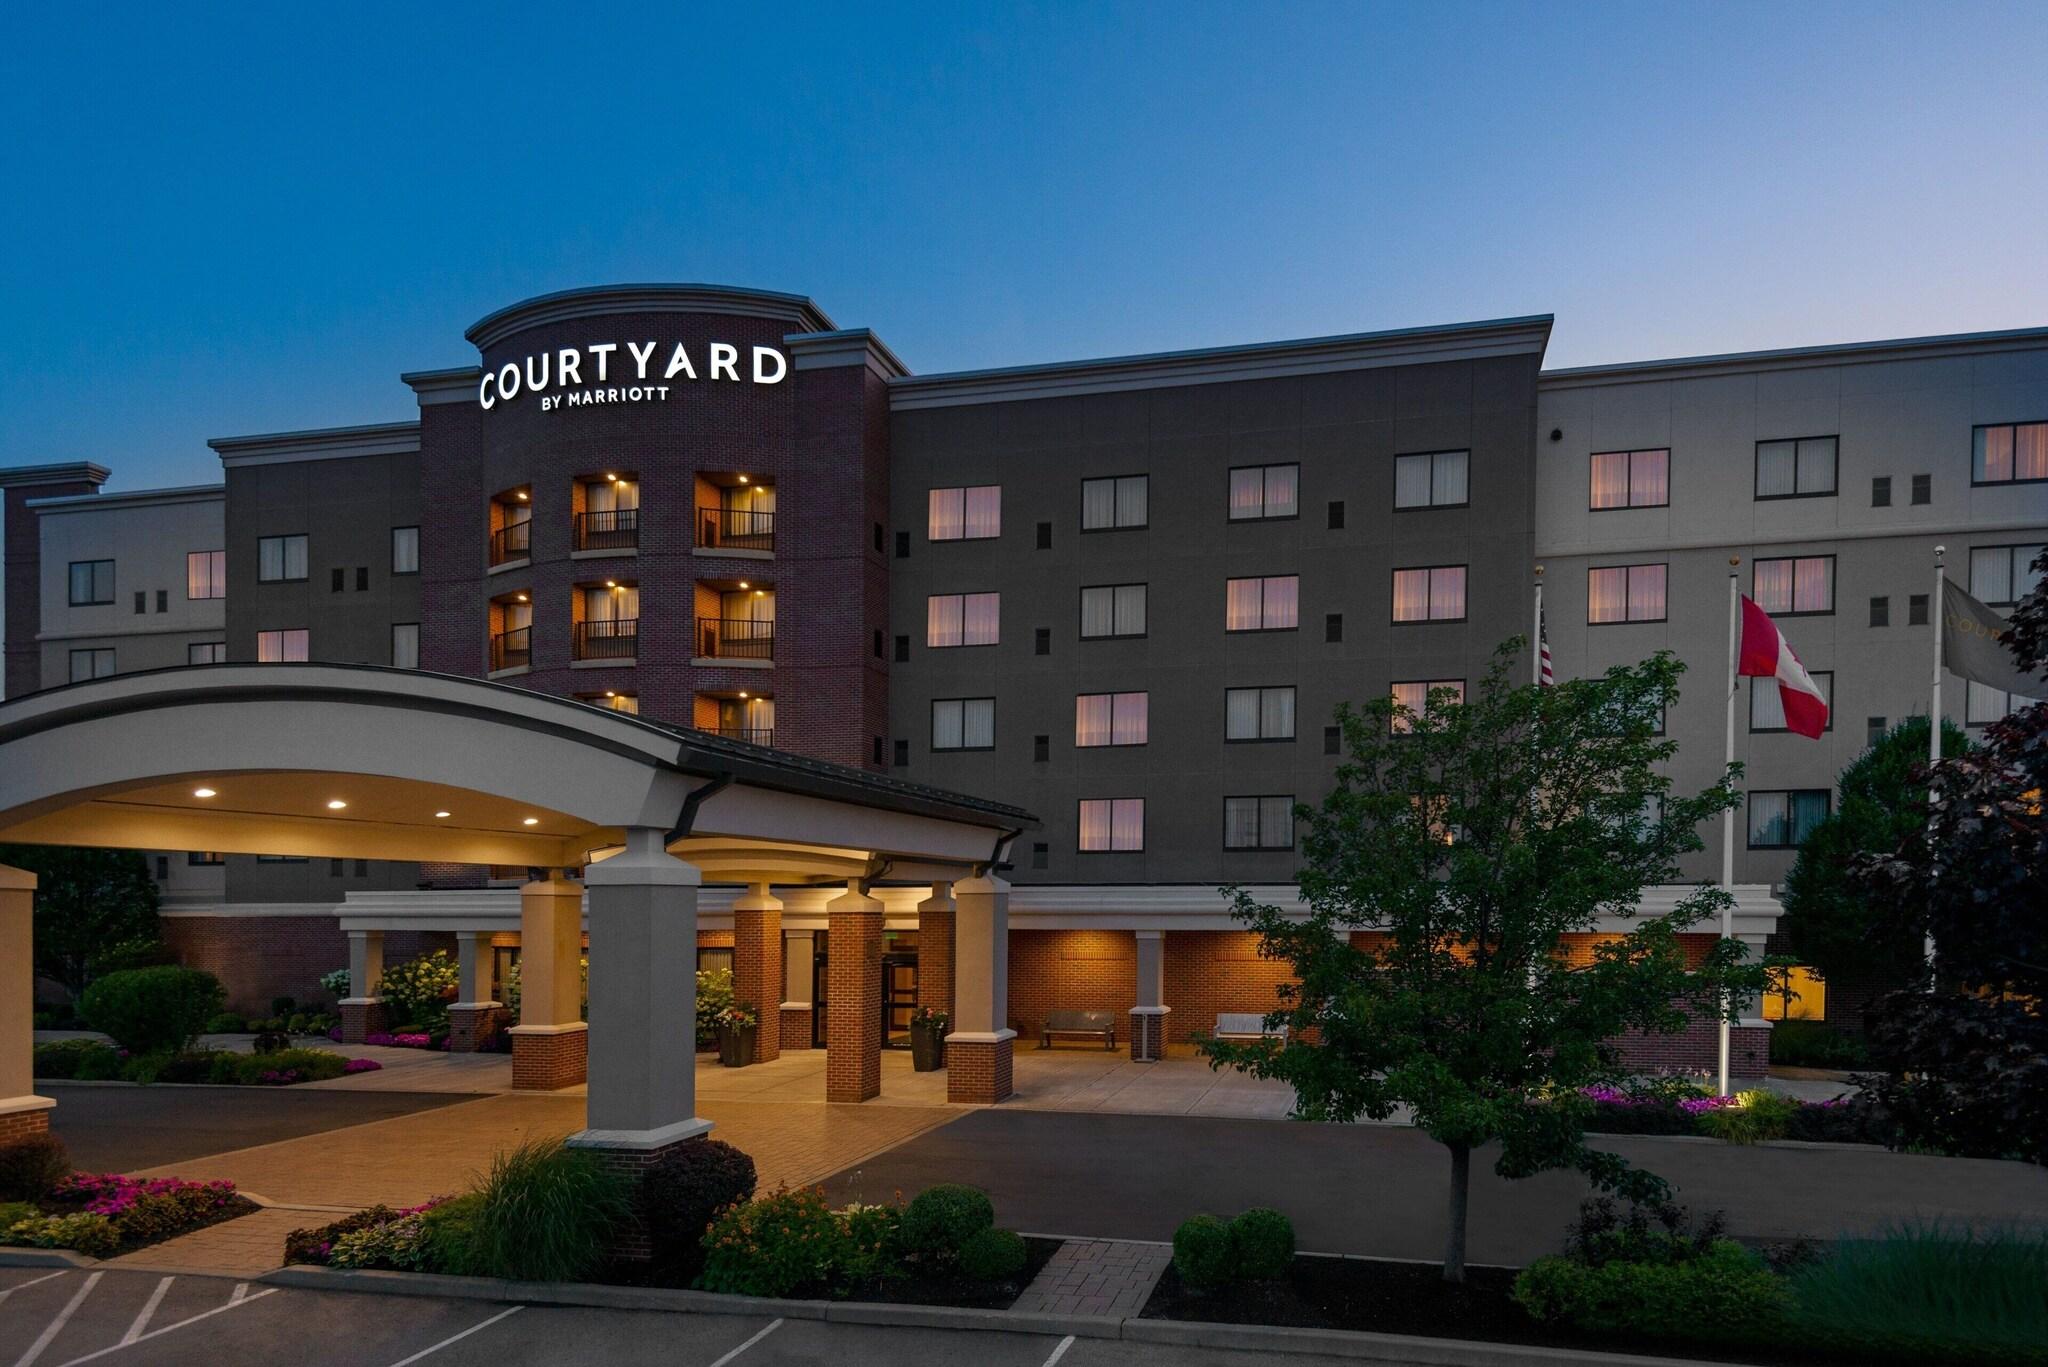 Courtyard by Marriott Buffalo Airport image